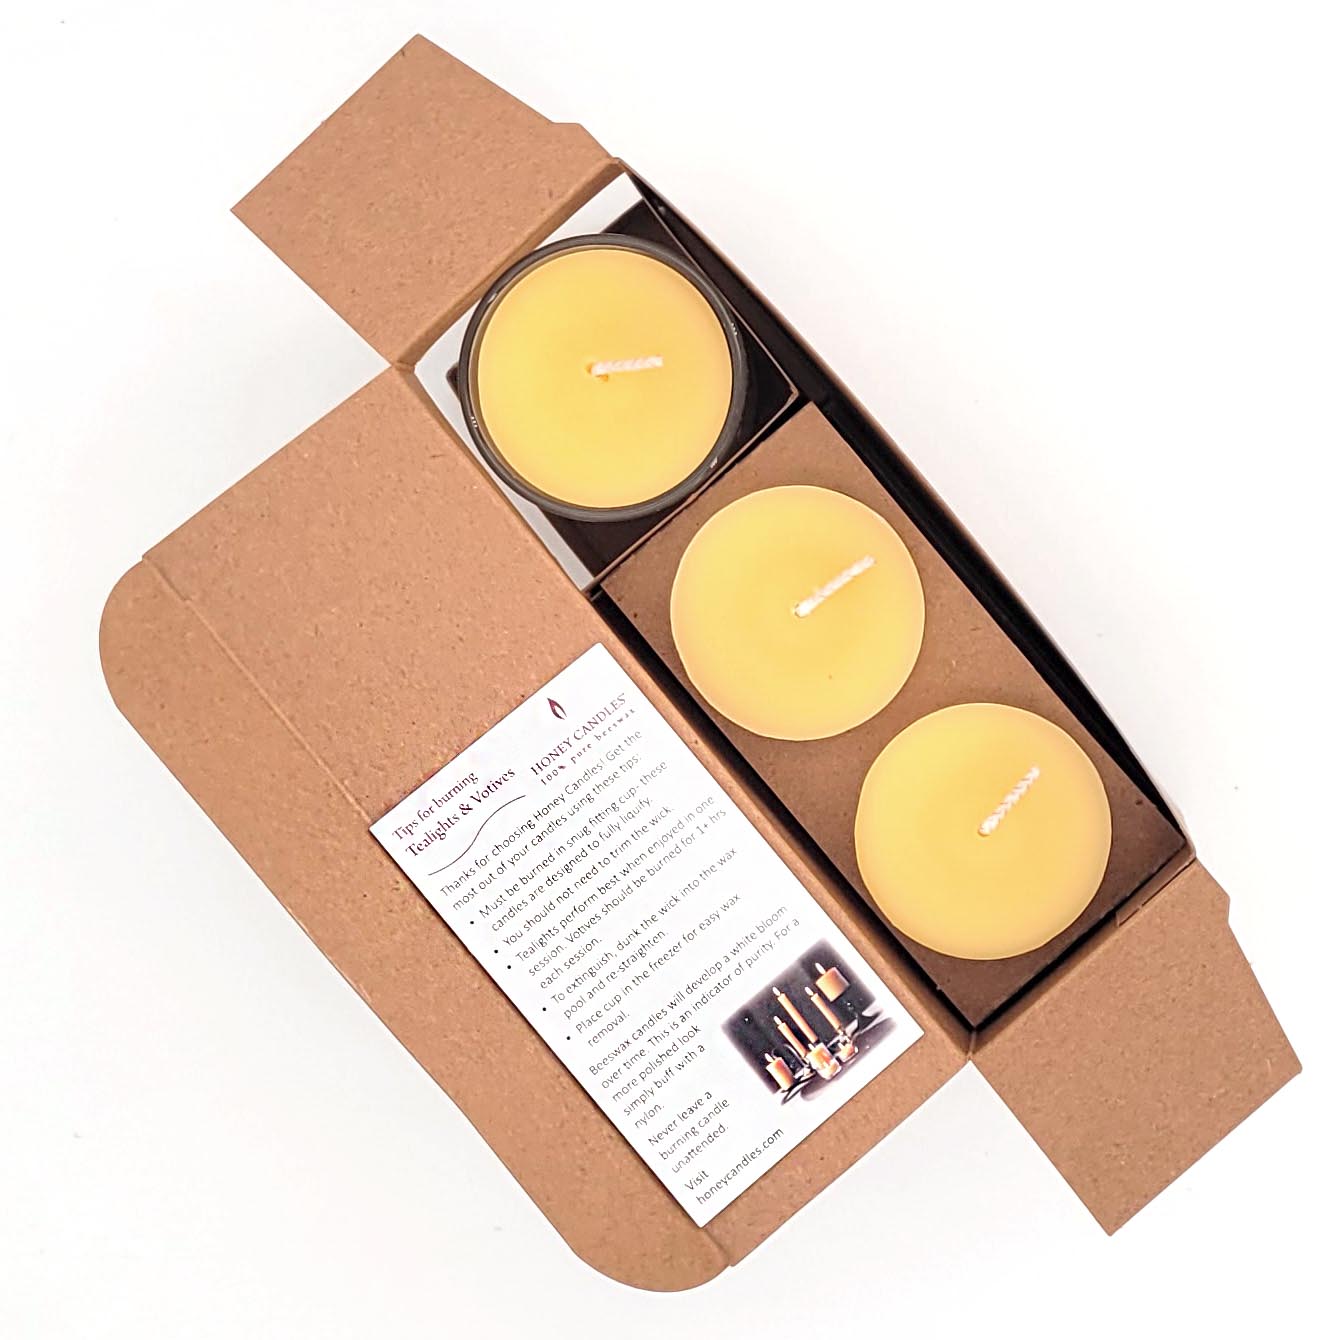 3 natural beeswax votive candles